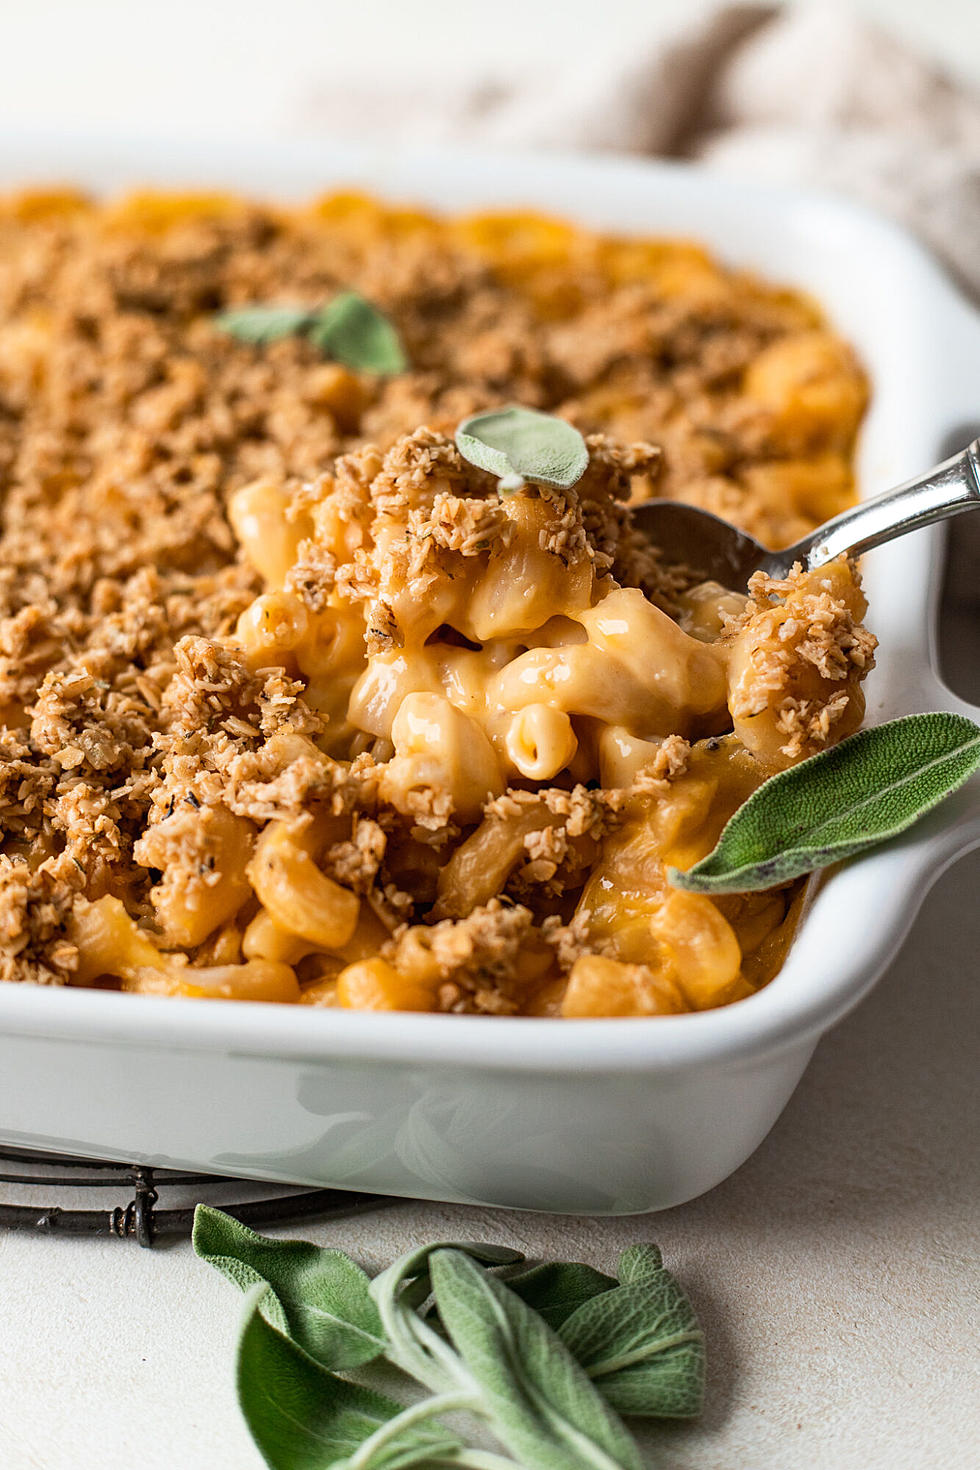 Easy Baked Vegan Mac and Cheese That’s Gluten-Free